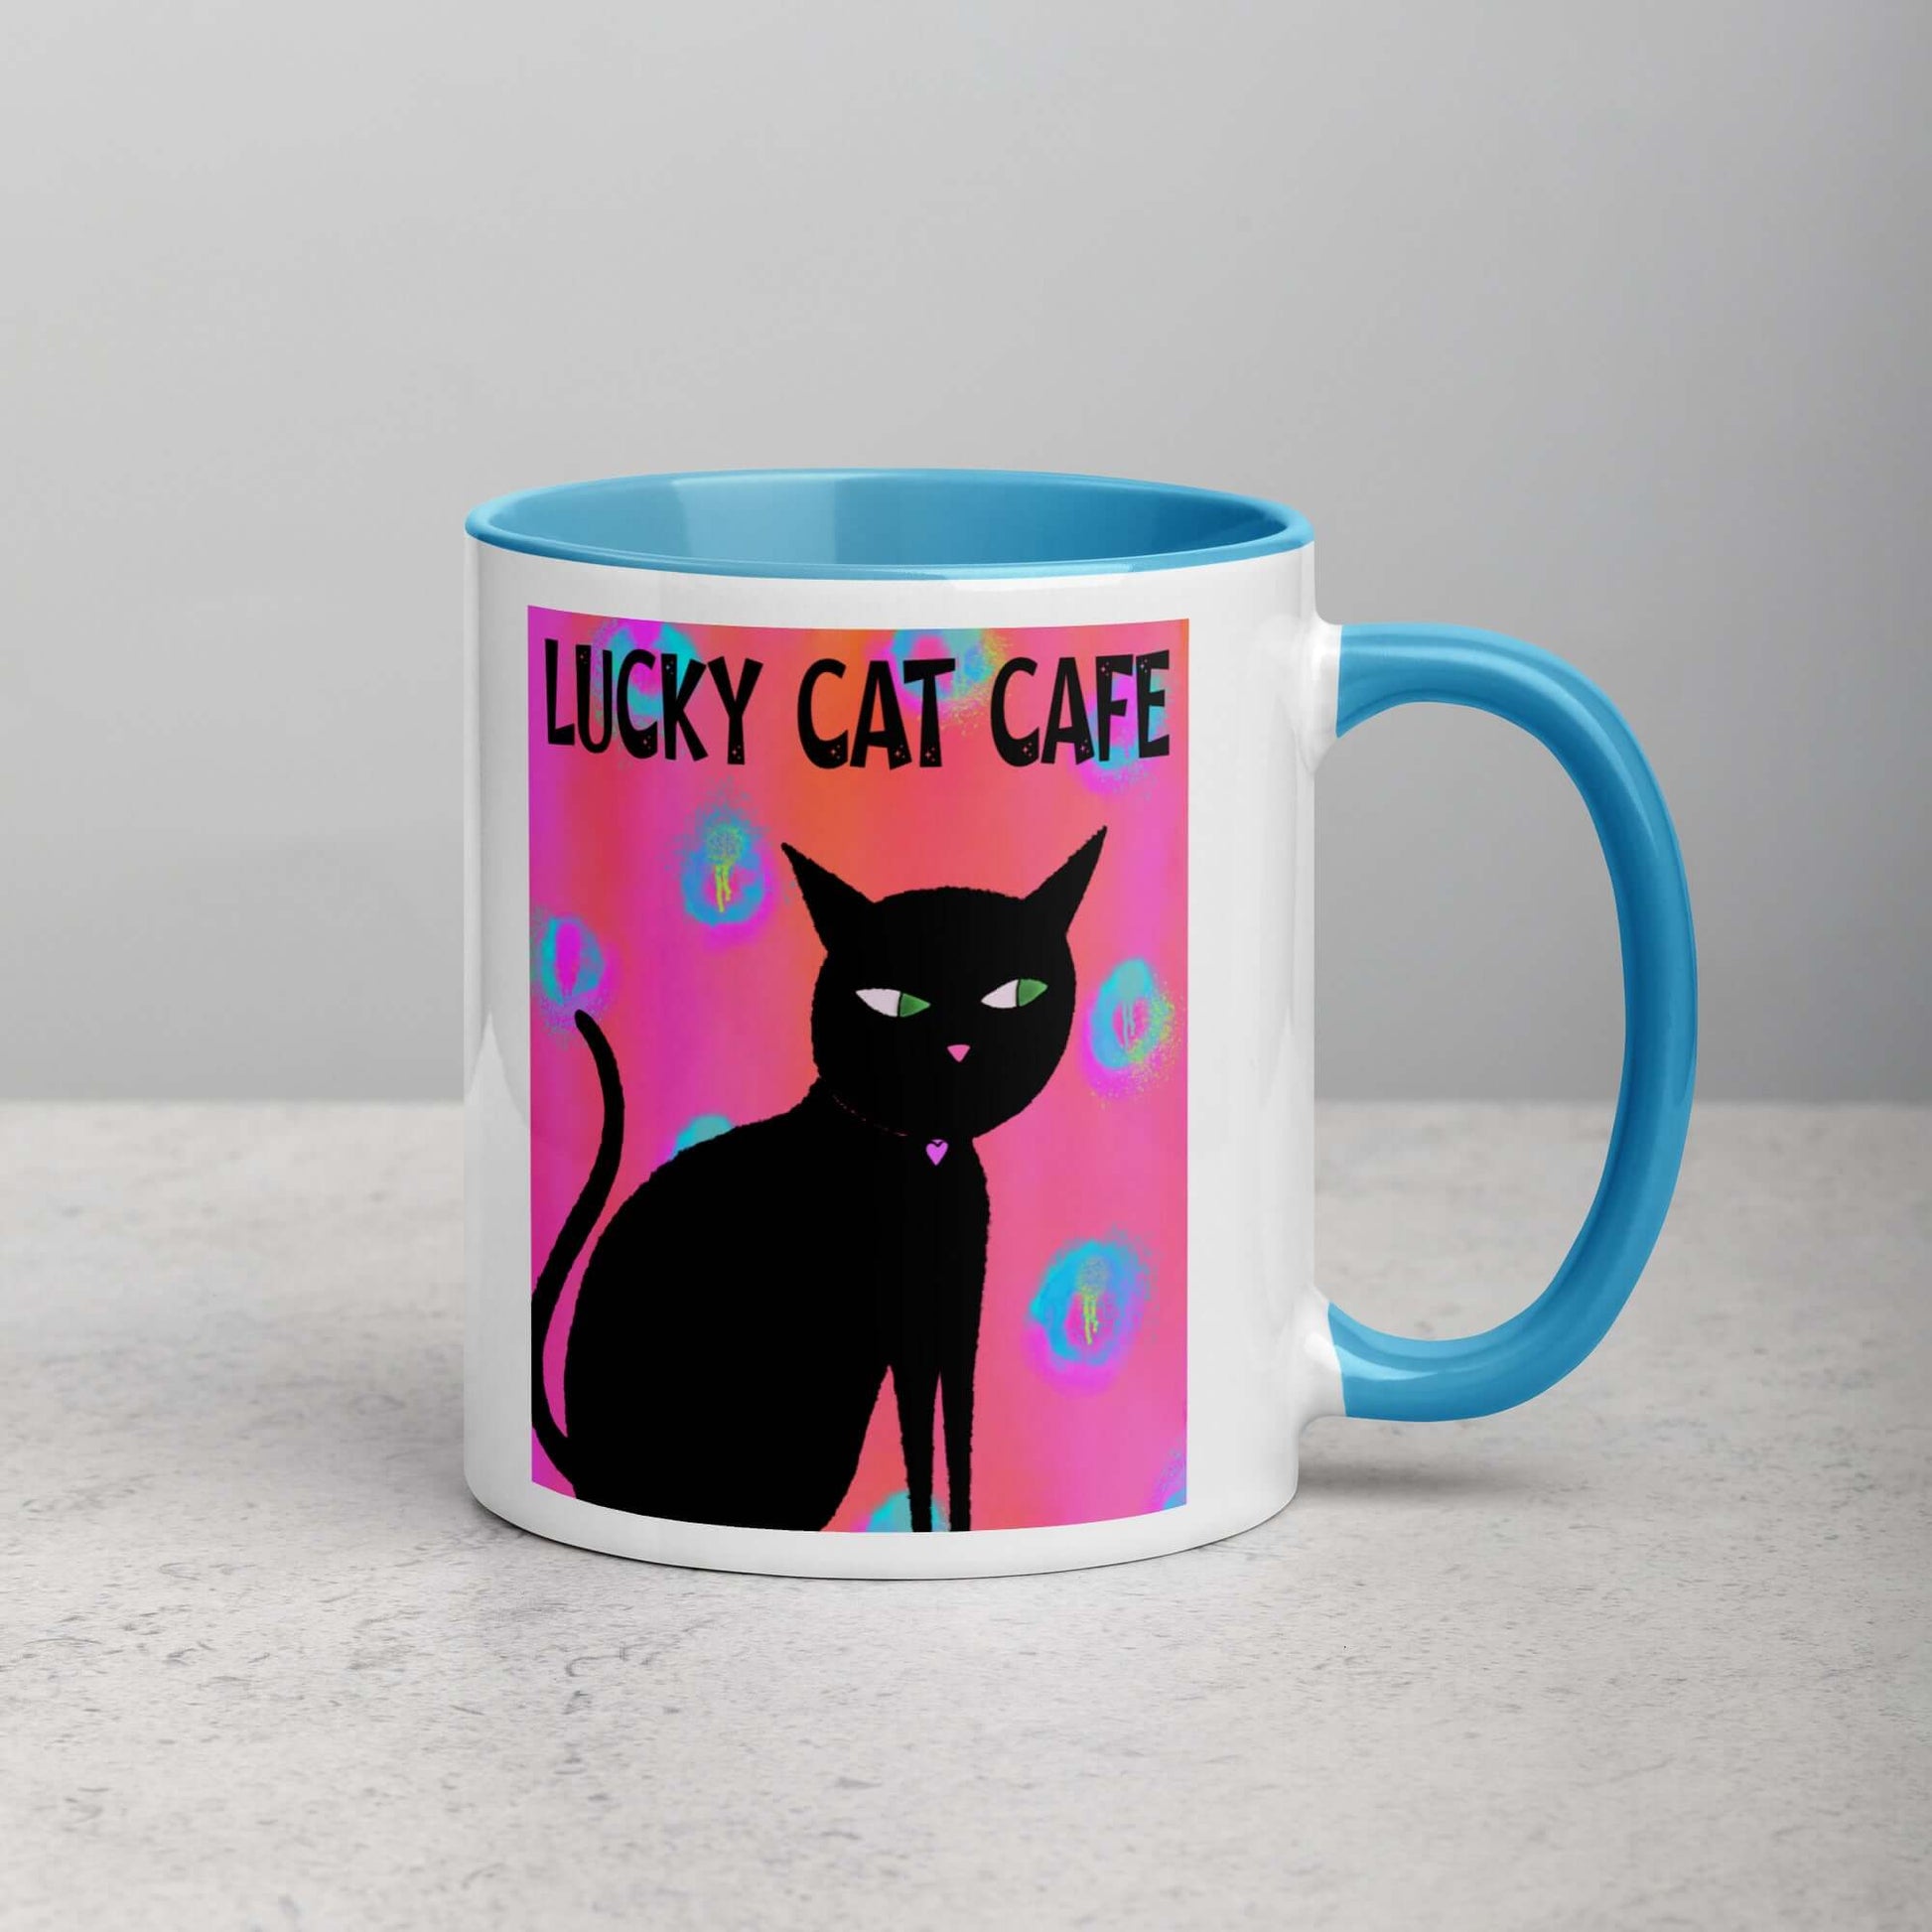 Black Cat on Hot Pink Tie Dye Background with Text “Lucky Cat Cafe” Mug with Light Blue Color Inside Right Handed Front View